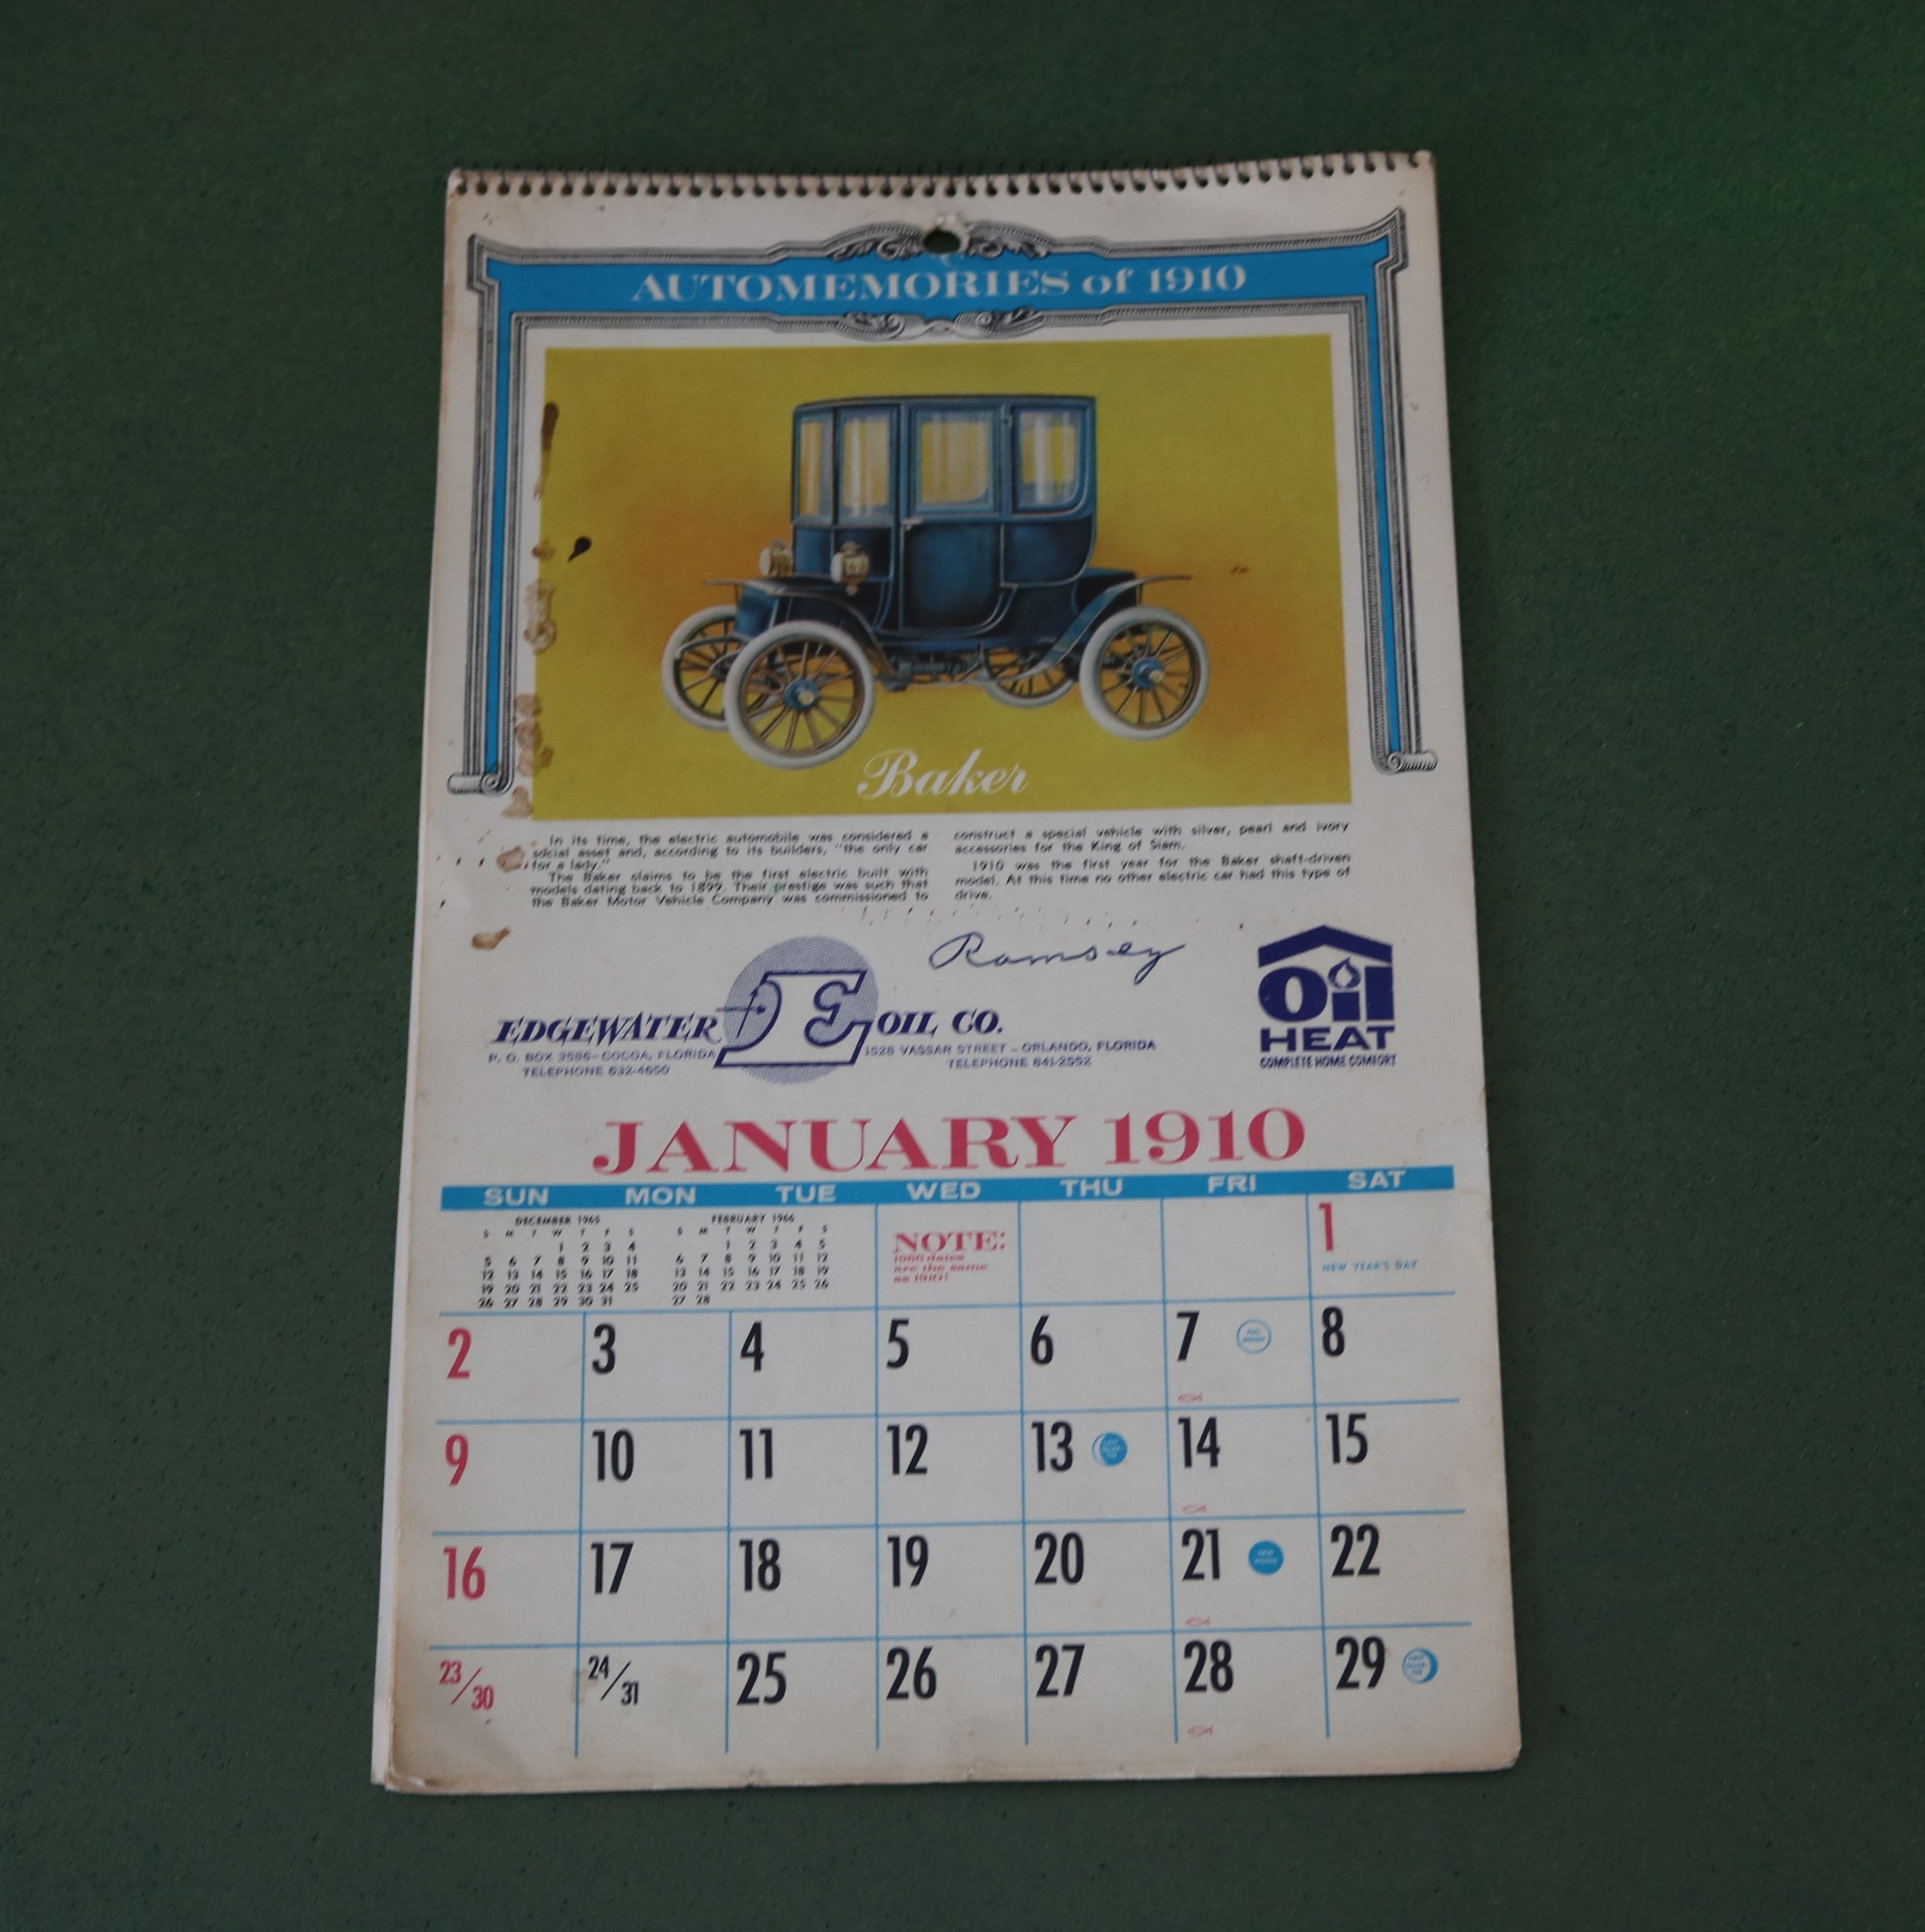 Sold at Auction: 1966 Player Piano Company Advertising Calendar